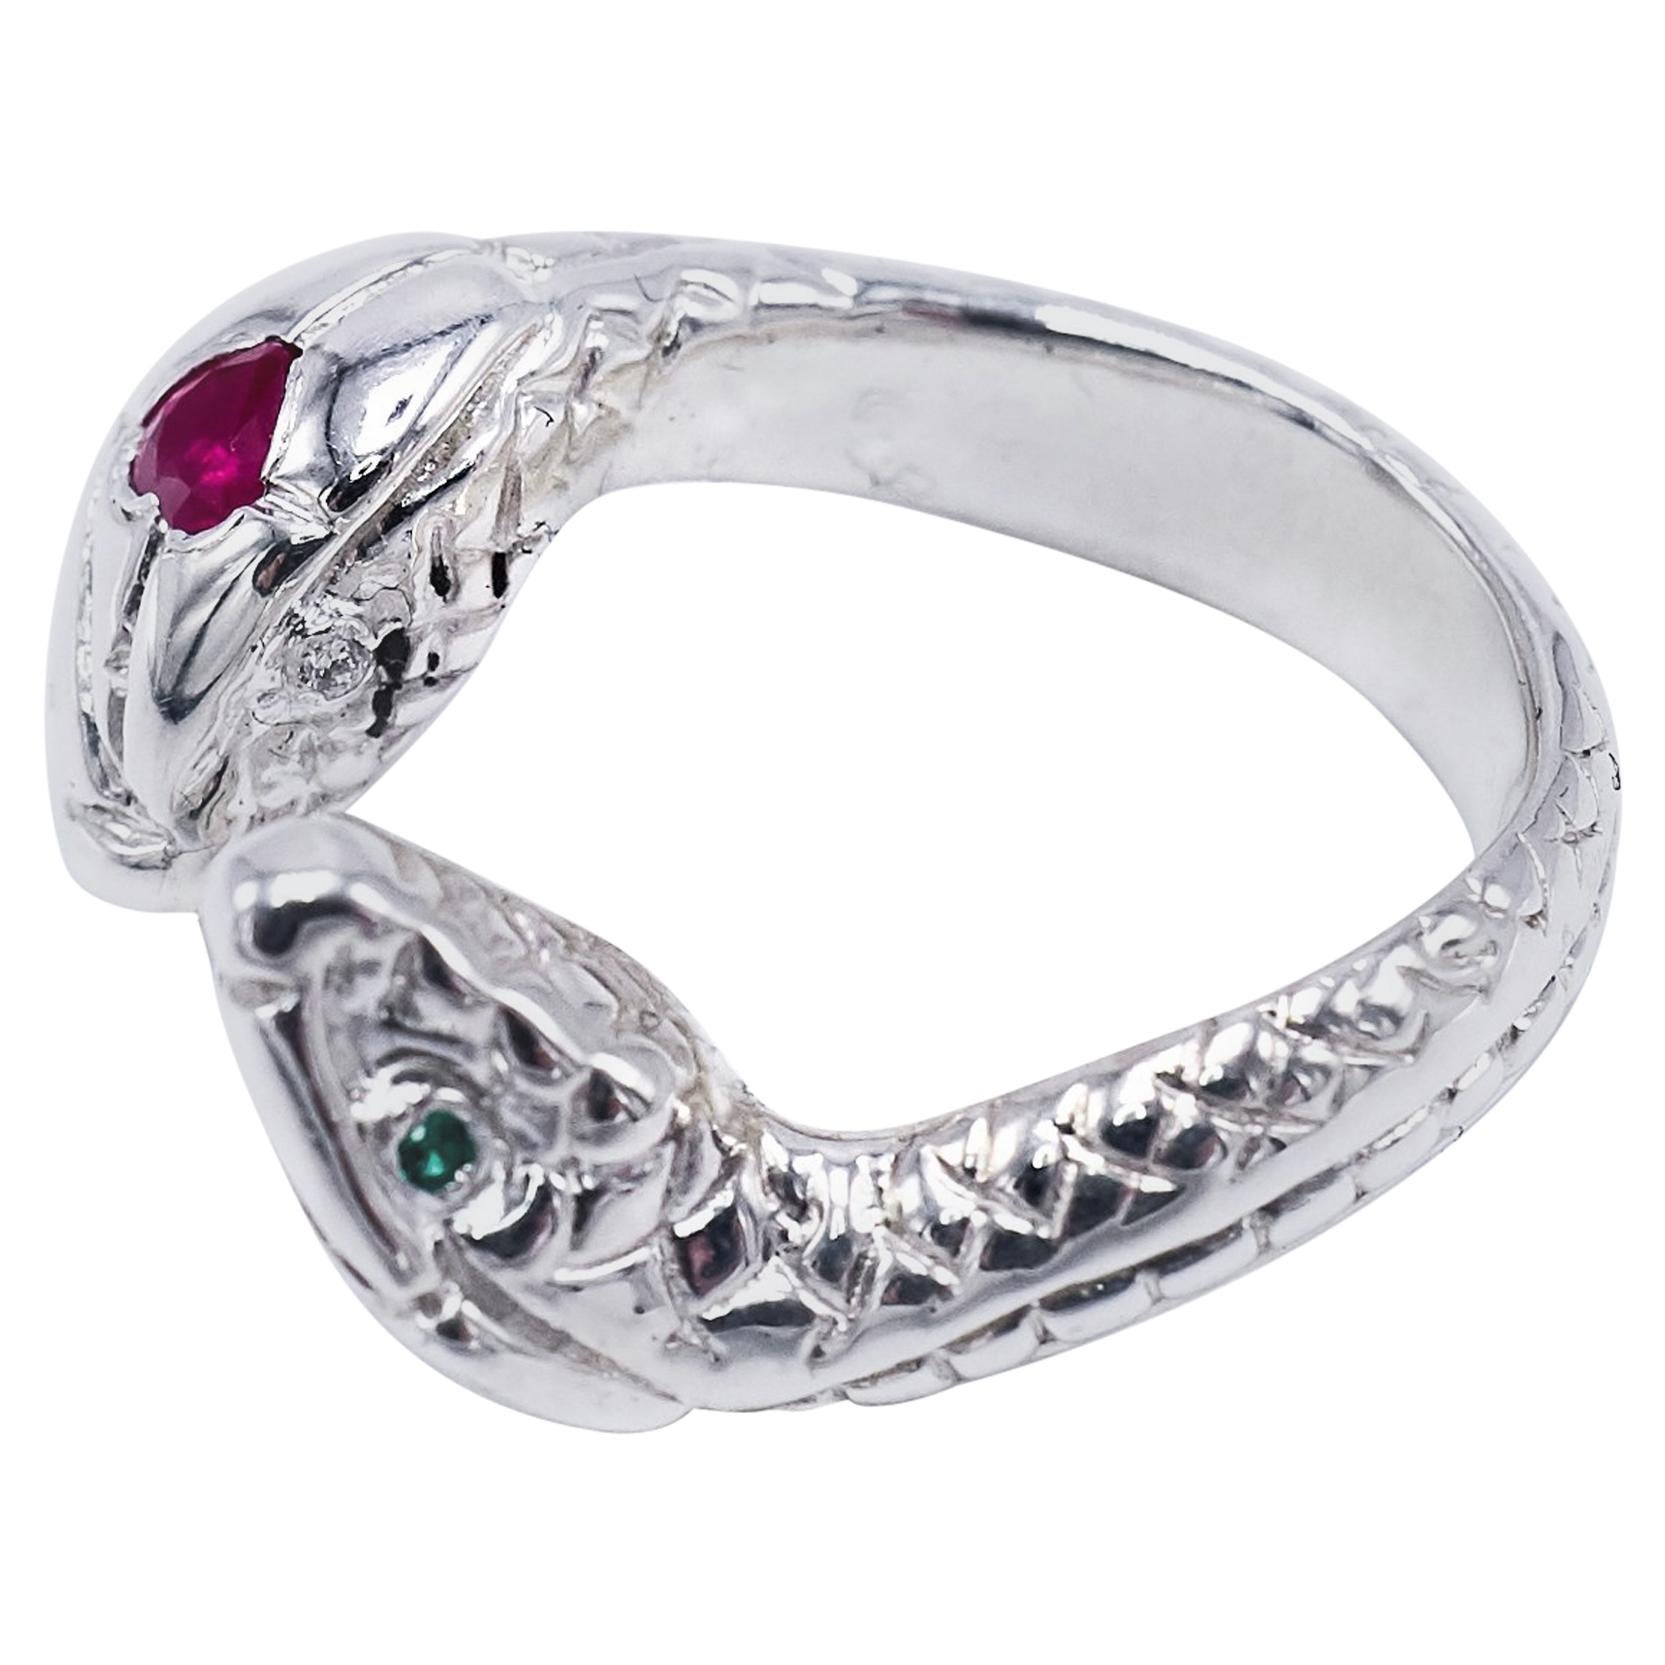 Heart Ruby White Diamond Emerald Snake Ring White Gold Cocktail Ring J Dauphin

This ring has a big heart shaped ruby and emerald and white diamond eyes ( 2 snake heads )

J DAUPHIN Statement Cocktail Ring 